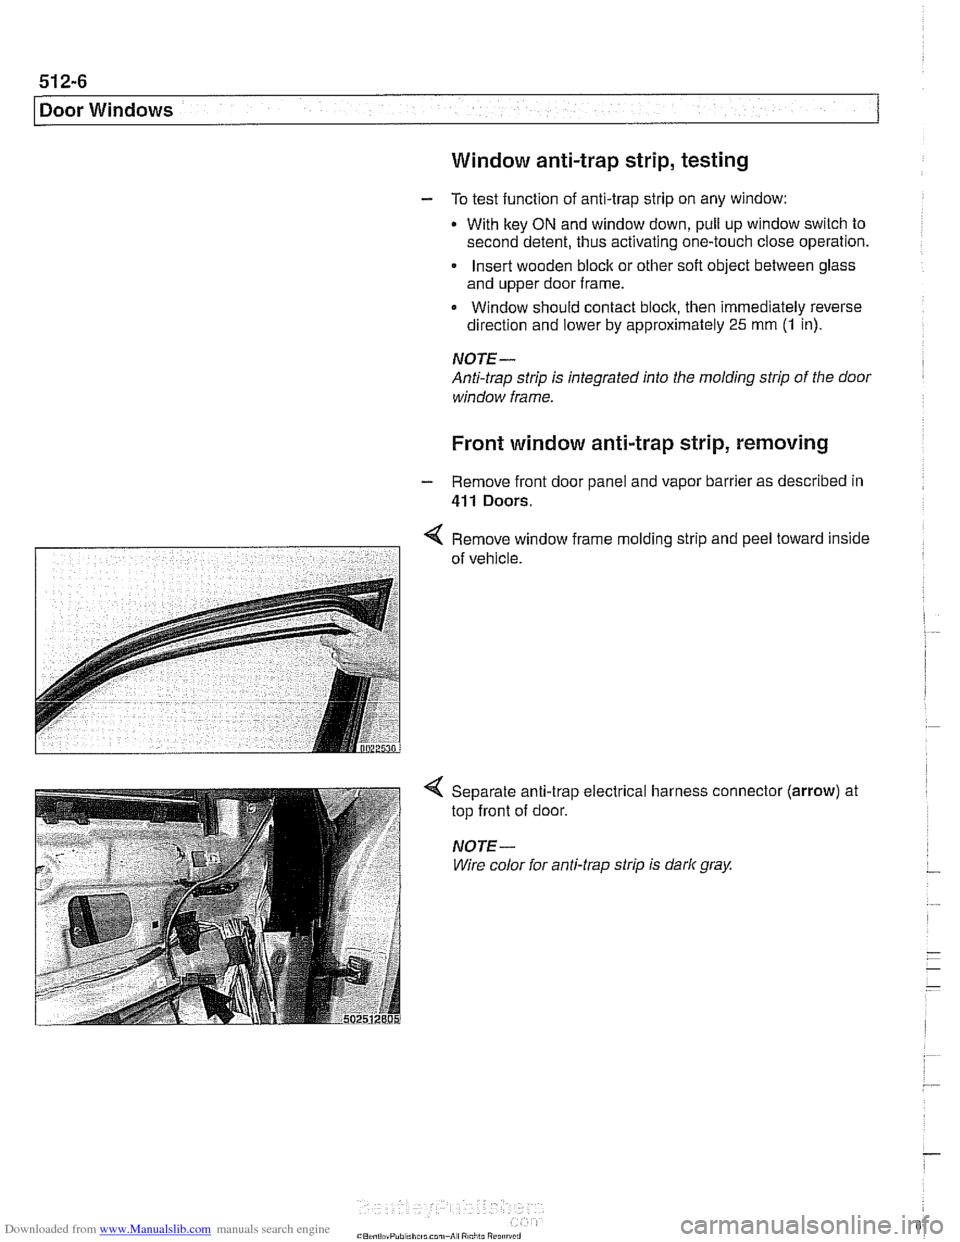 BMW 525i 2001 E39 User Guide Downloaded from www.Manualslib.com manuals search engine 
Door Windows 
Window anti-trap strip, testing 
- To test  function  of anti-trap strip  on any  window: 
With  key 
ON and window down,  pull 